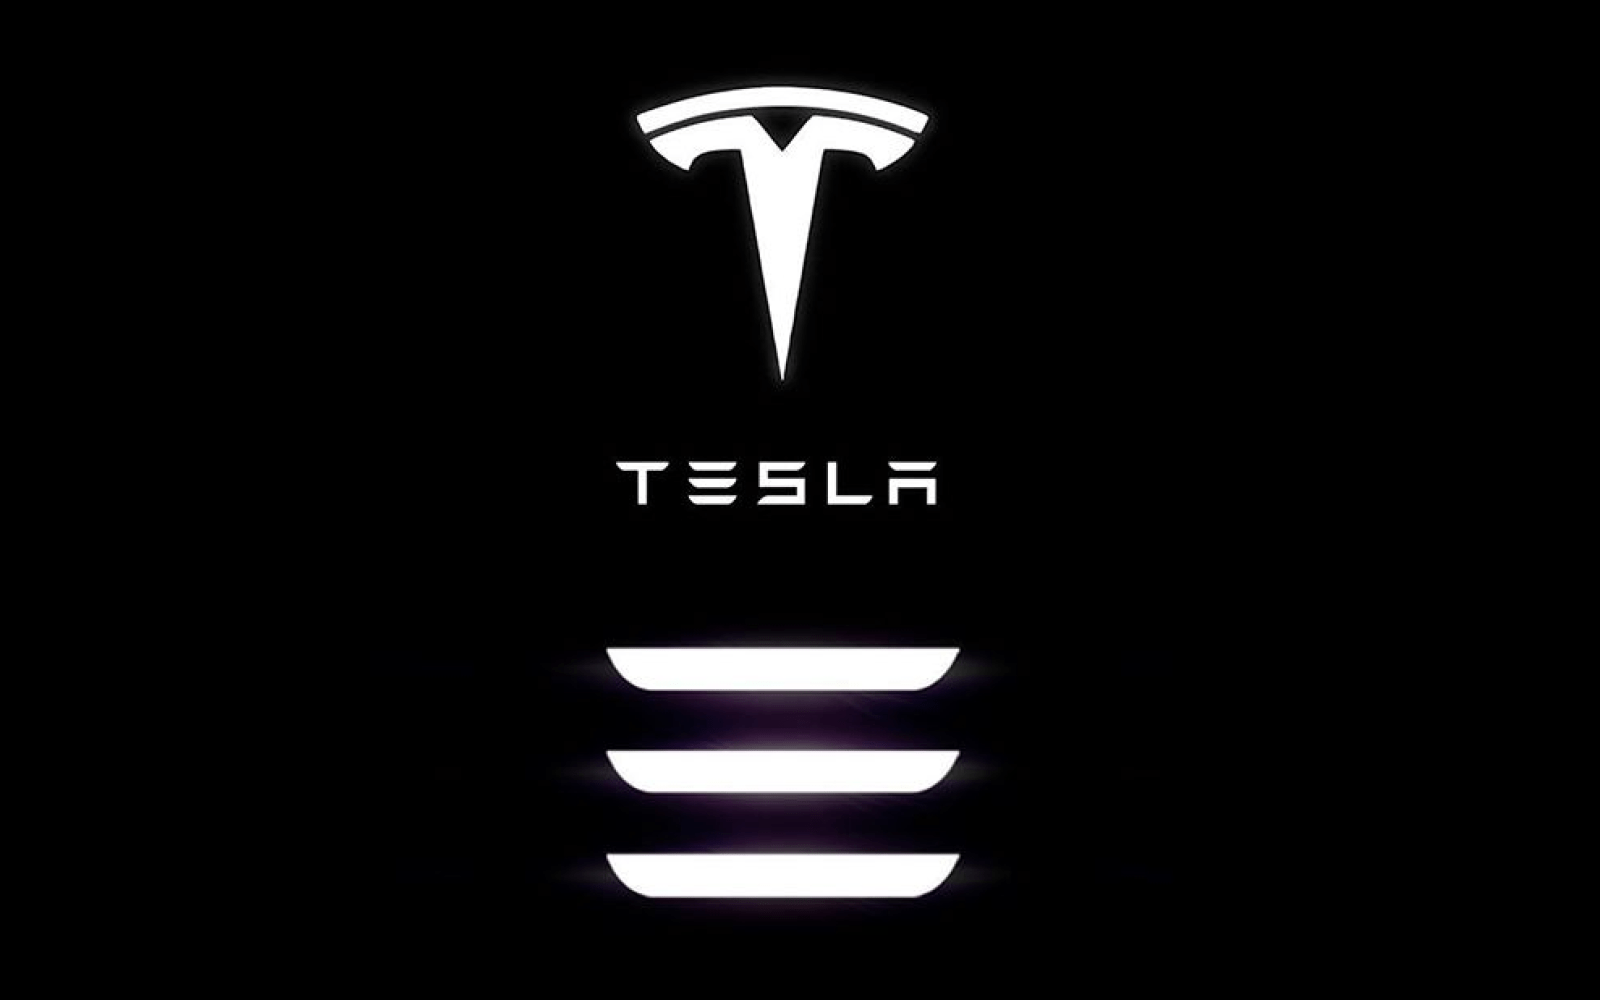 Three White Lines Logo - Tesla officially applies for Model 3 trademark: 